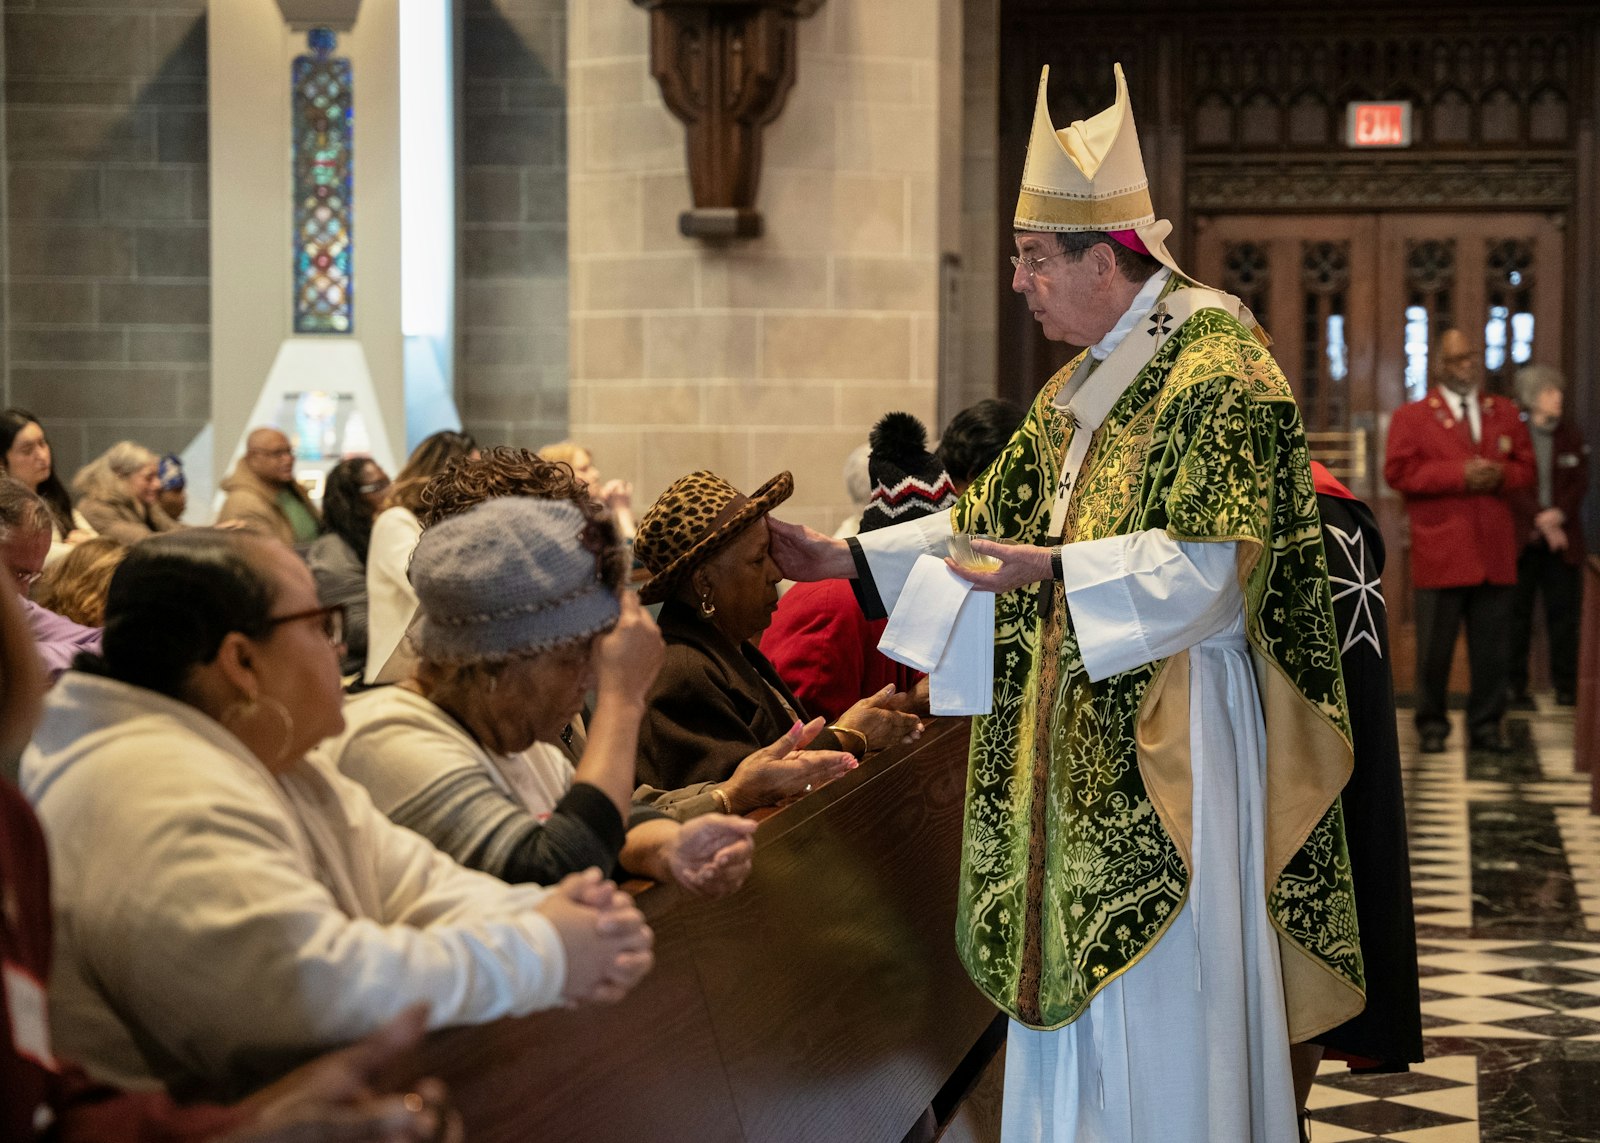 Sickness offered alongside the suffering of Christ makes the community richer, Archbishop Vigneron said to the congregation, which included individuals with illnesses, their families and caregivers and members of the Order of Malta, whose primary charism is ministering to the sick.